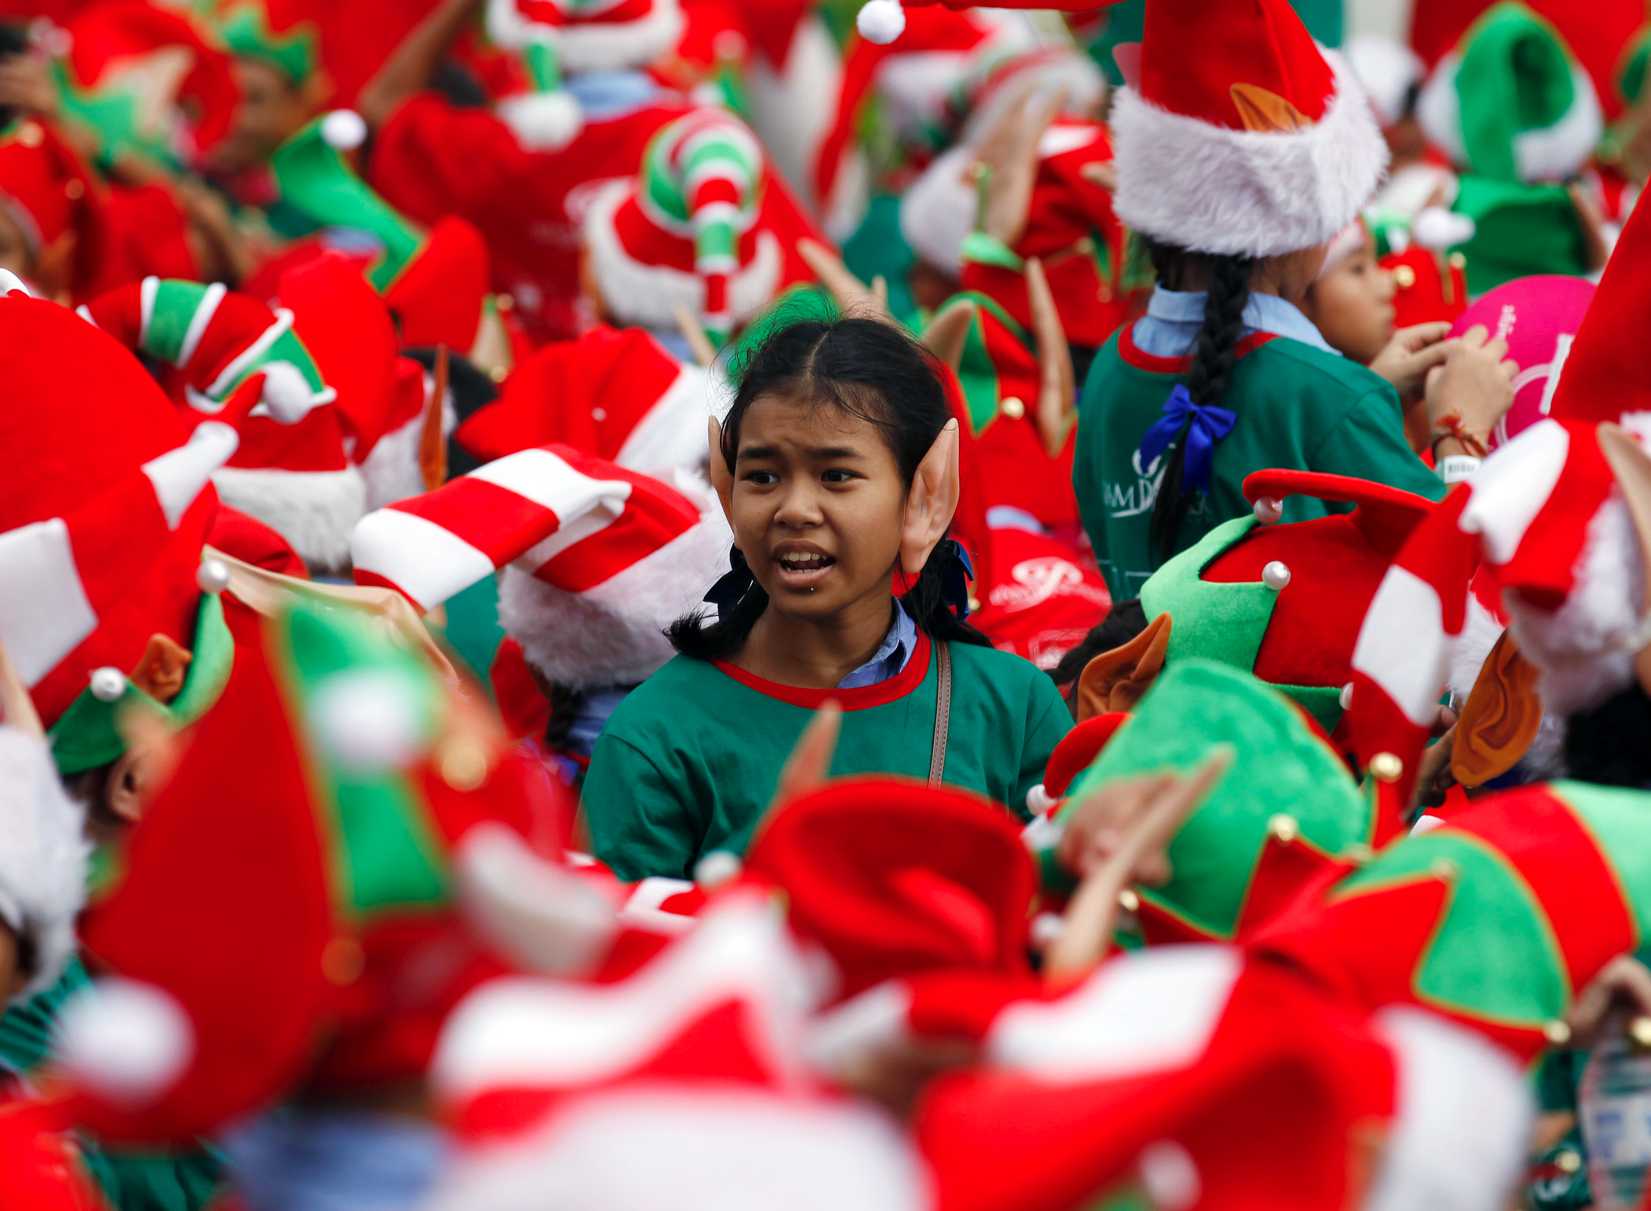 Students gather to break the Guinness World Record for the largest gathering of Christmas elves outside a shopping mall in Bangkok on Nov. 25, 2014 (Chaiwat Subprasom—Reuters)